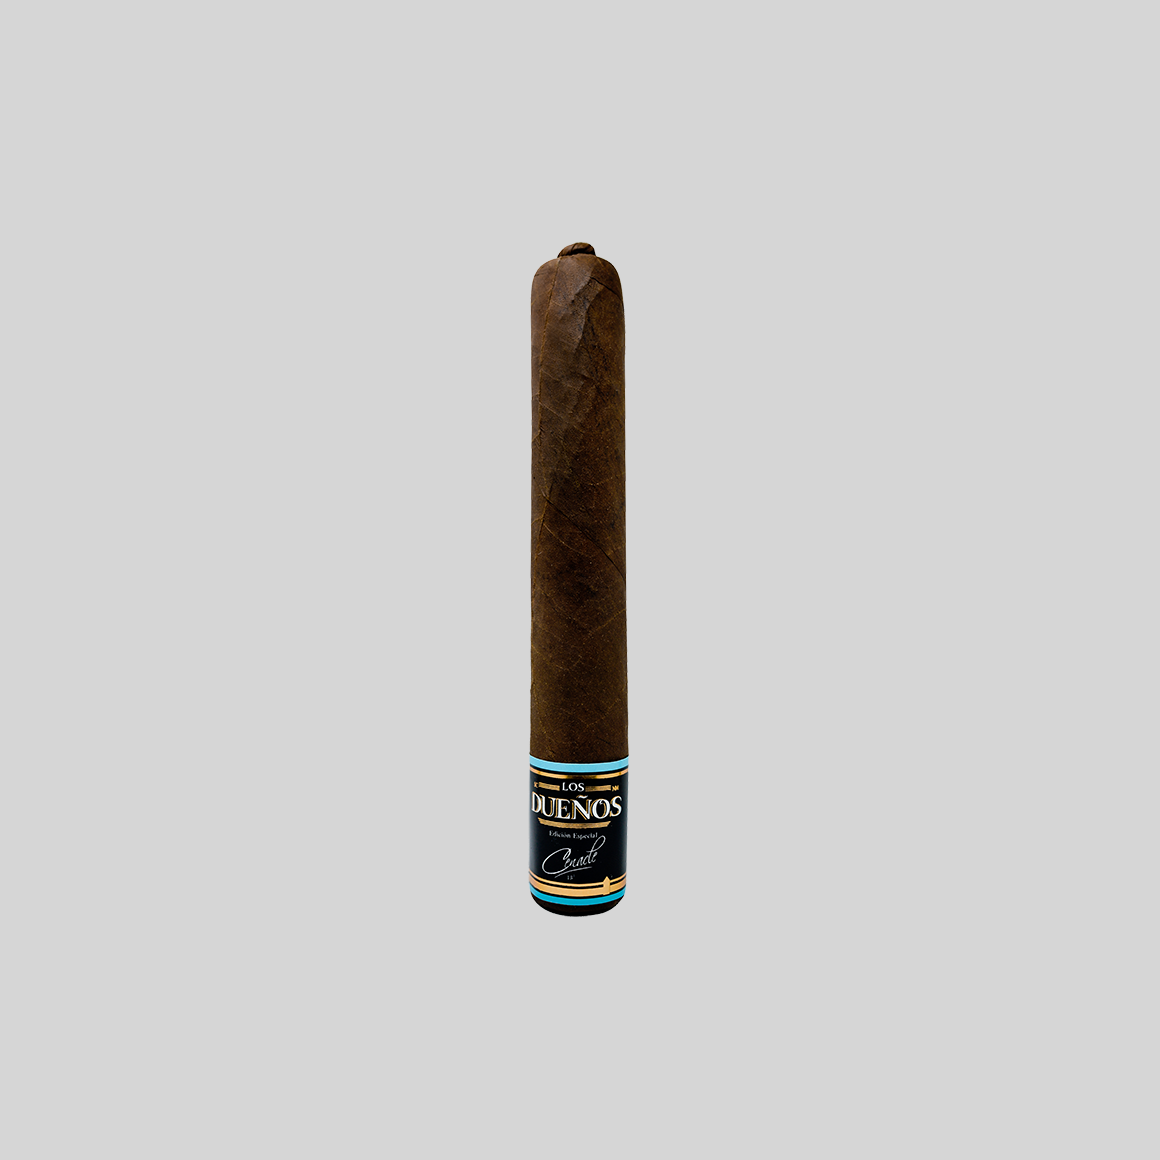 SPECIAL EDITION CENACLE MADURO WRAPPER